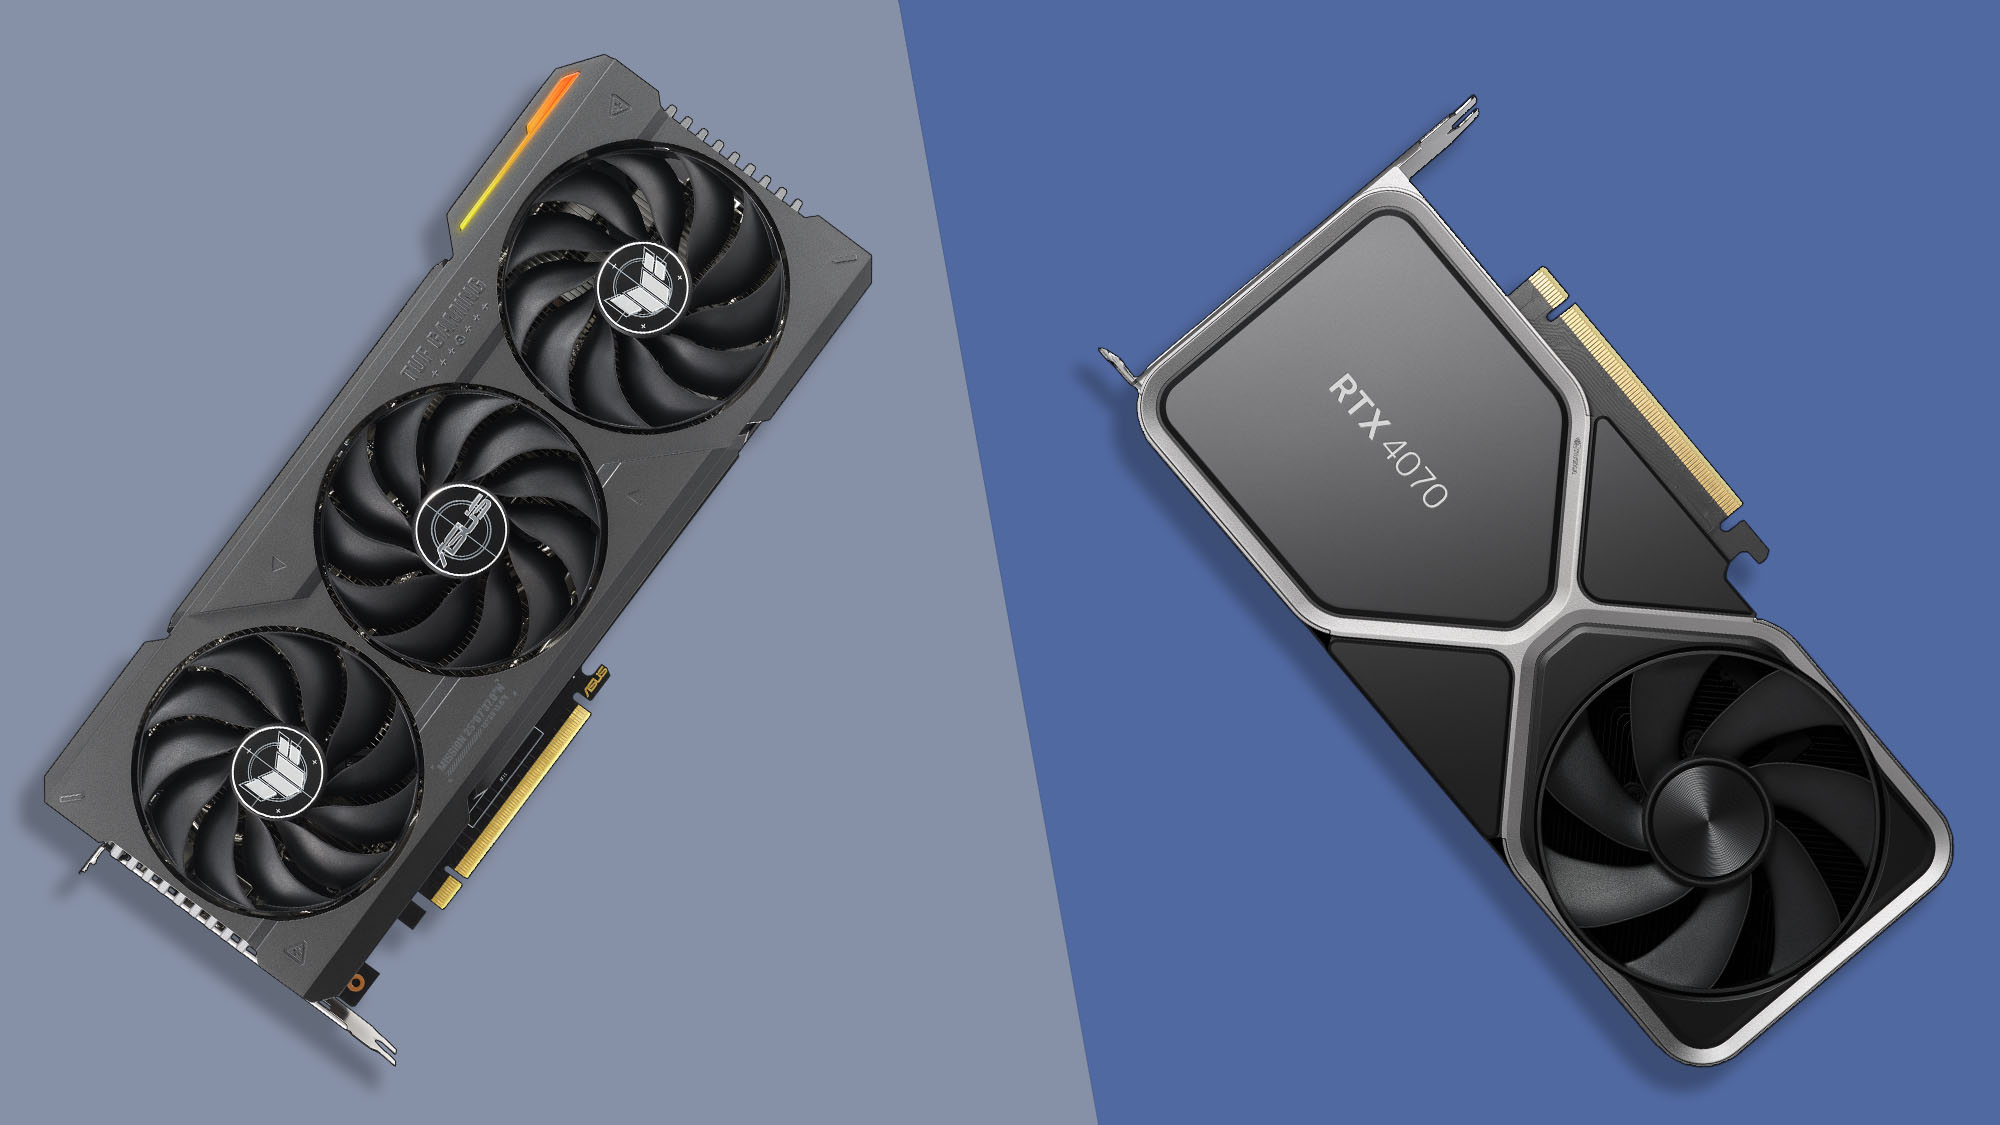 Nvidia RTX 4080 and 4070 Ti are finally selling well – but I still can't  recommend them